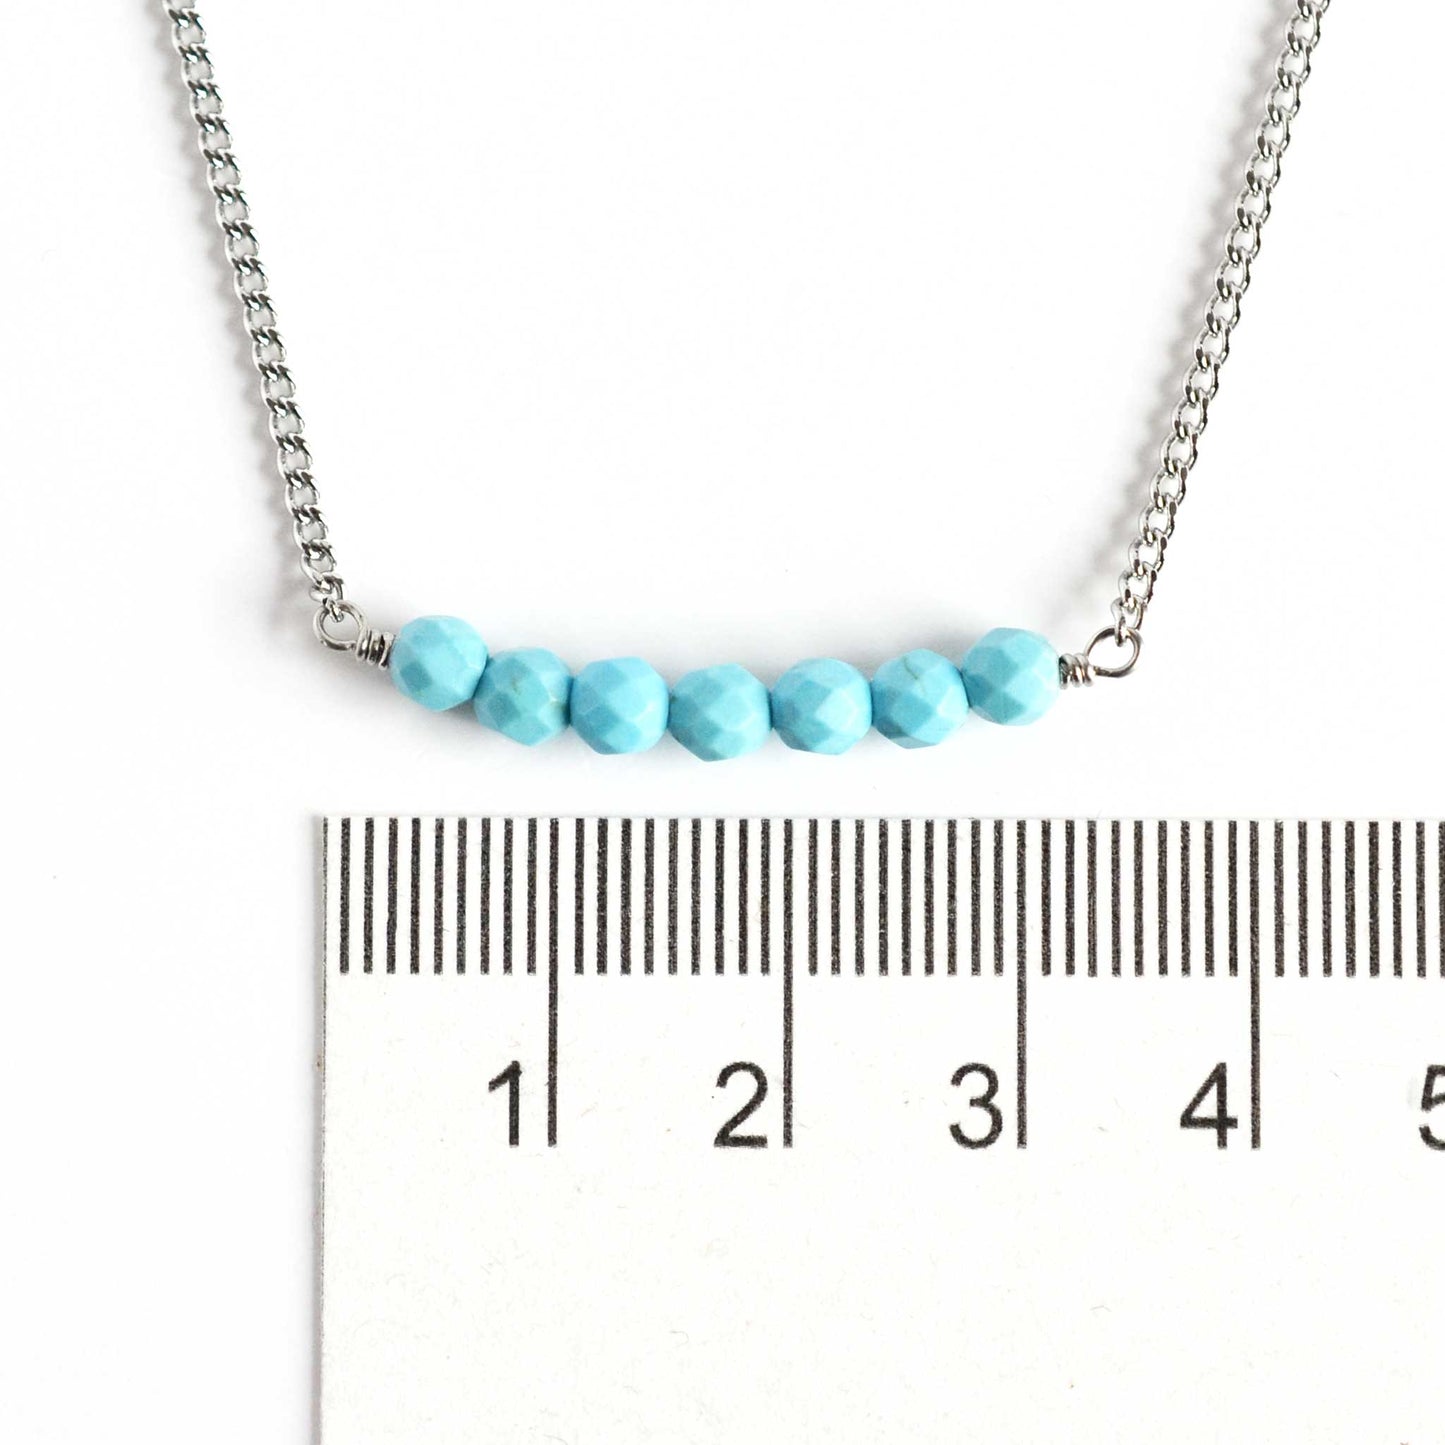 Dainty Turquoise necklace with 4mm beads next to ruler